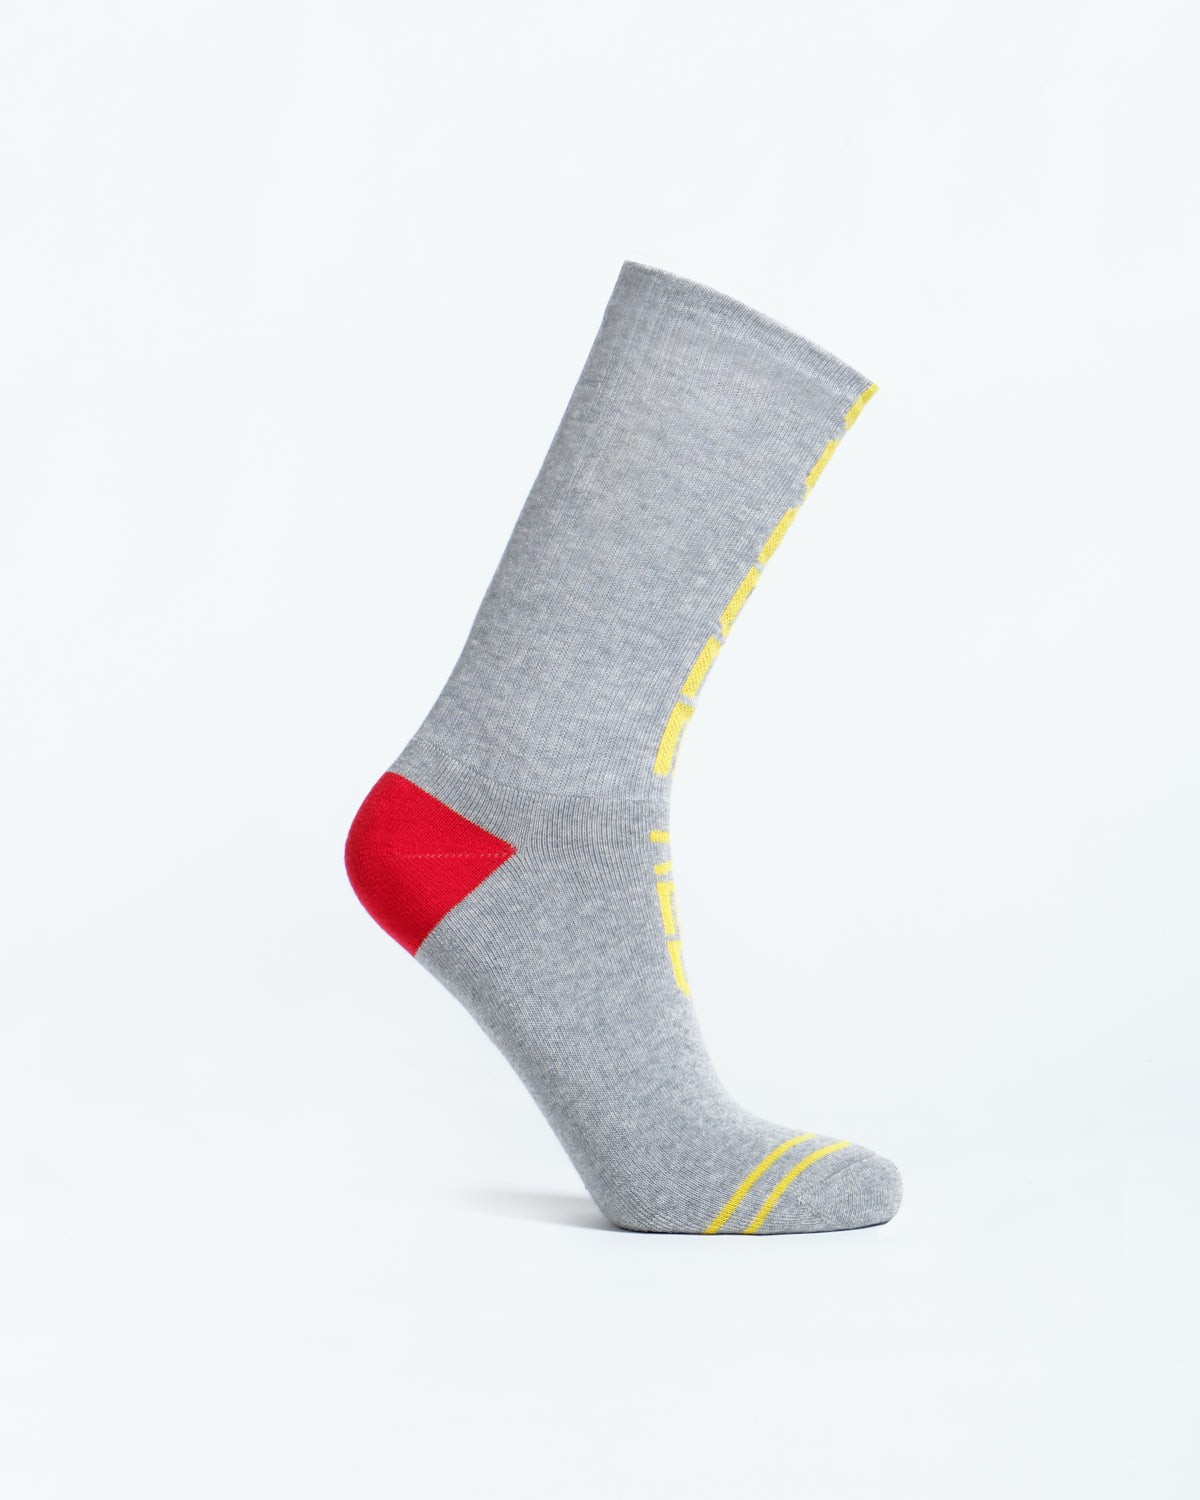 SPORT IS YOUR GANG Yellow Stripes Socks